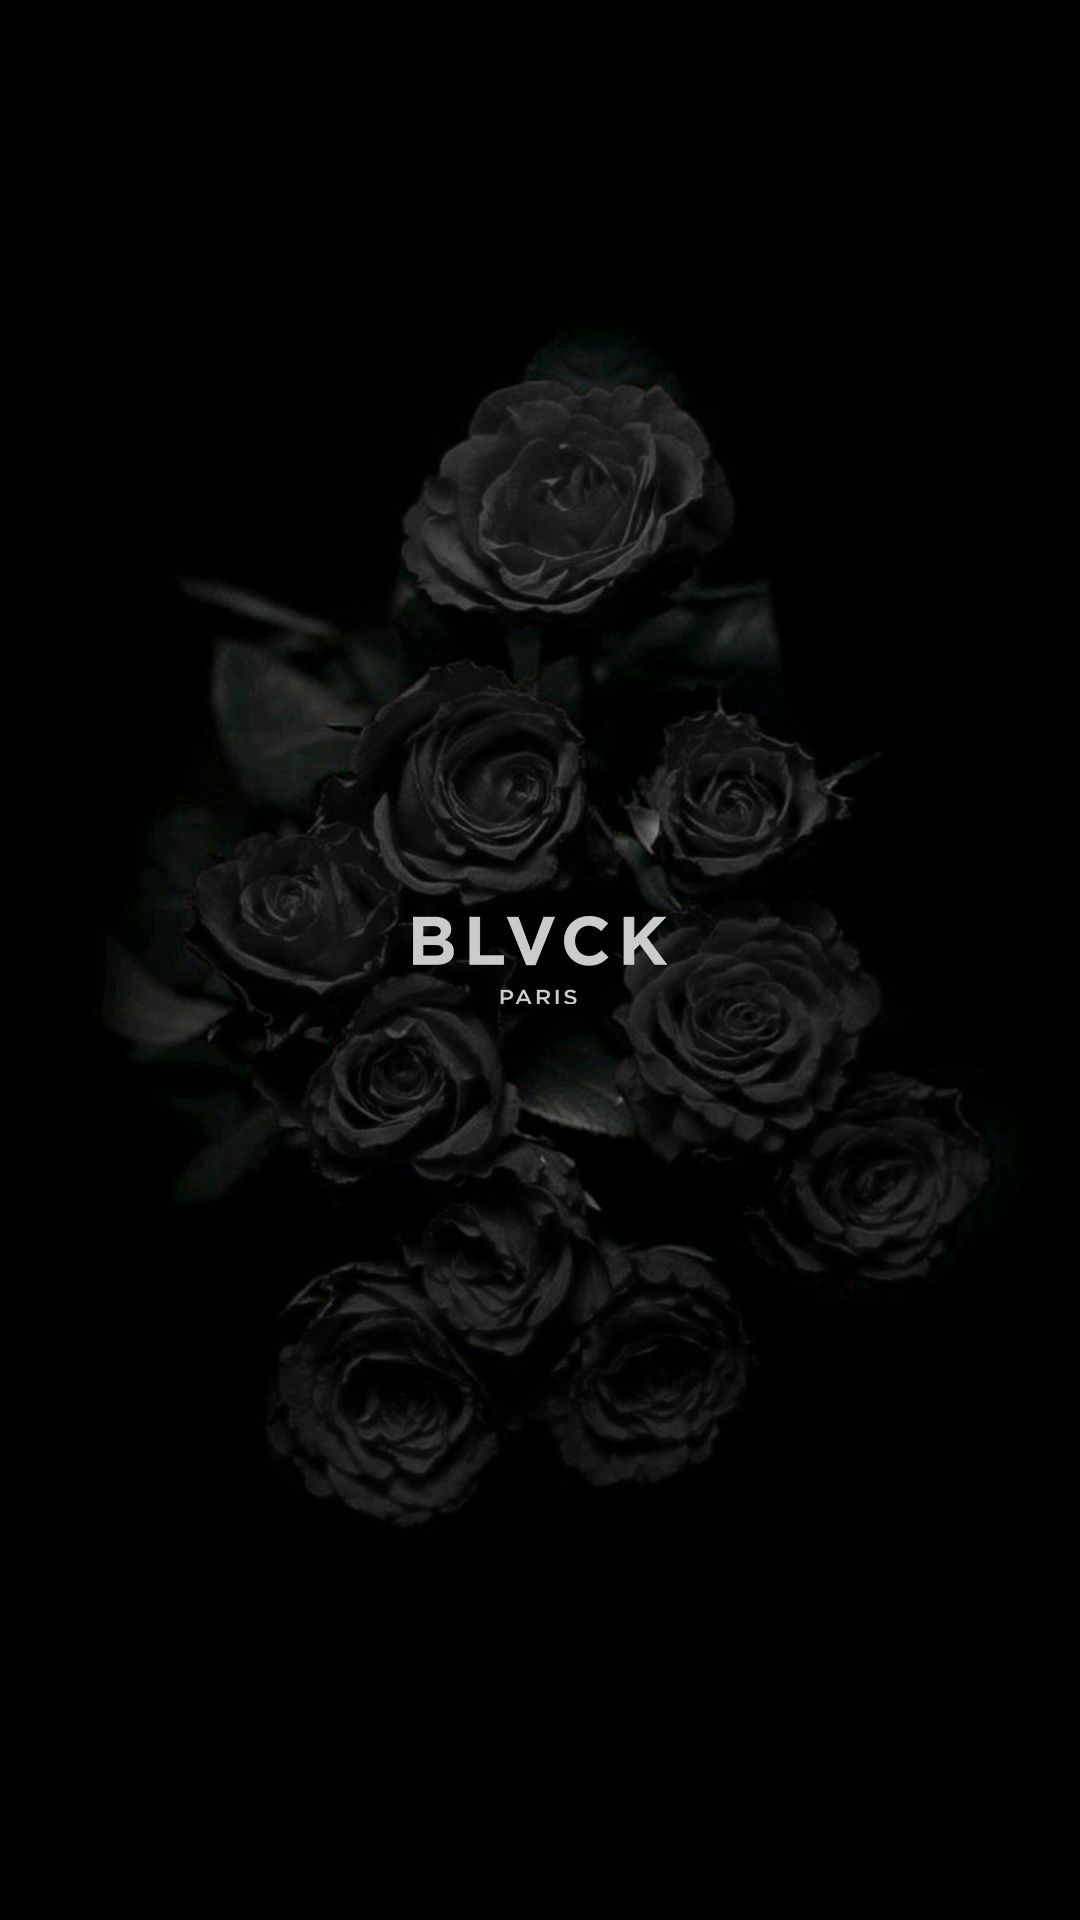 Black Roses Wallpaper. Black roses wallpaper, Black and white aesthetic, Black rose